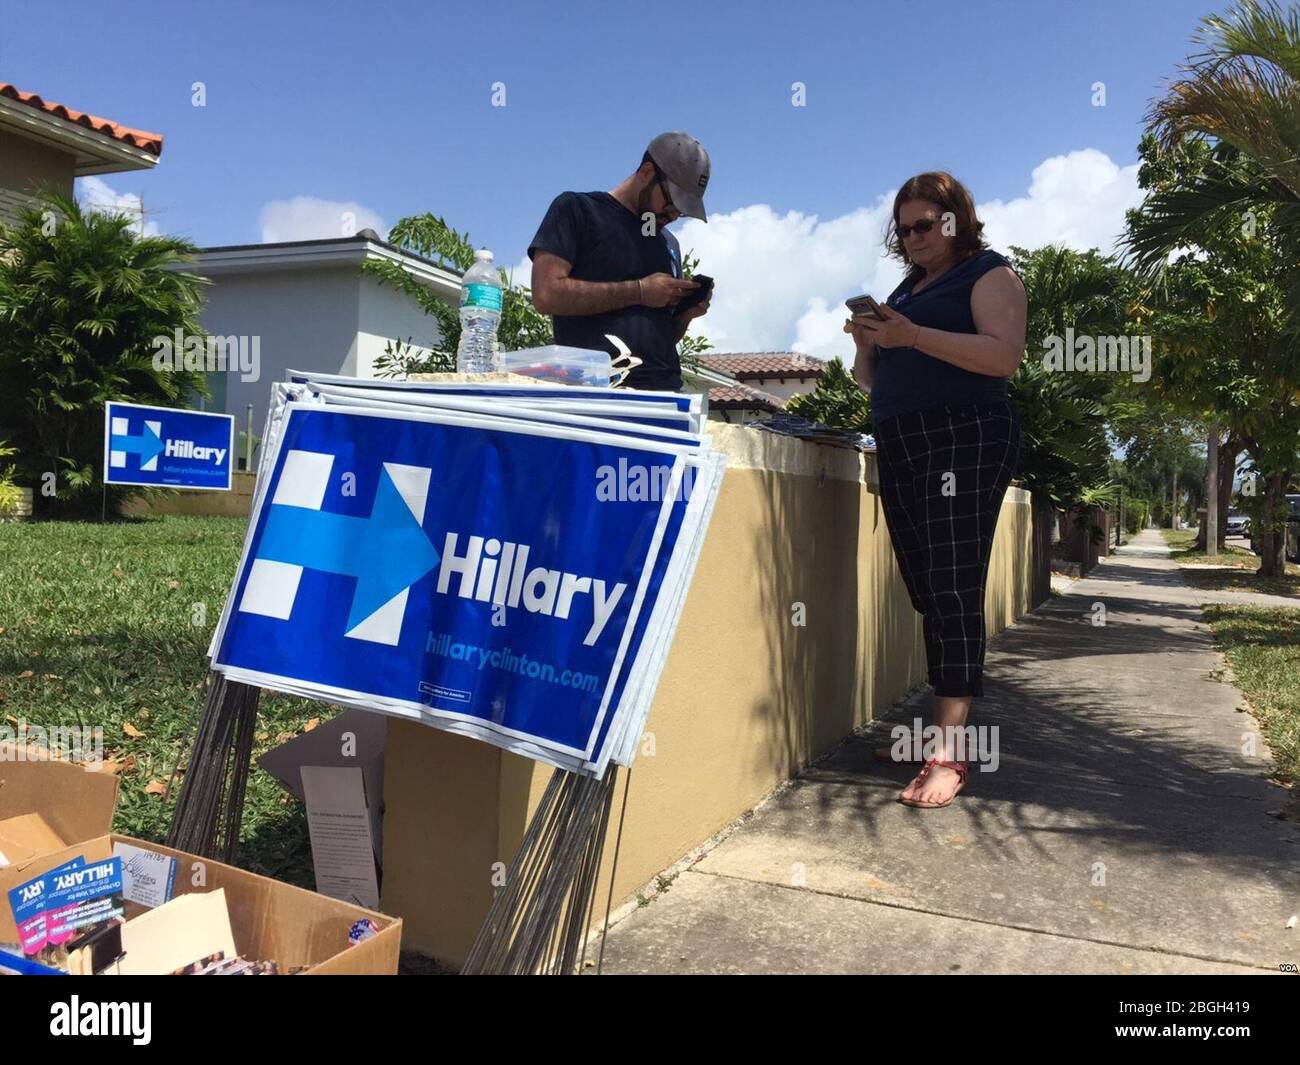 Hillary Clinton volunteers walk through Little Havana trying to seek votes for the Democratic candidate ahead of the March 15, 2016, primary in Florida. Stock Photo